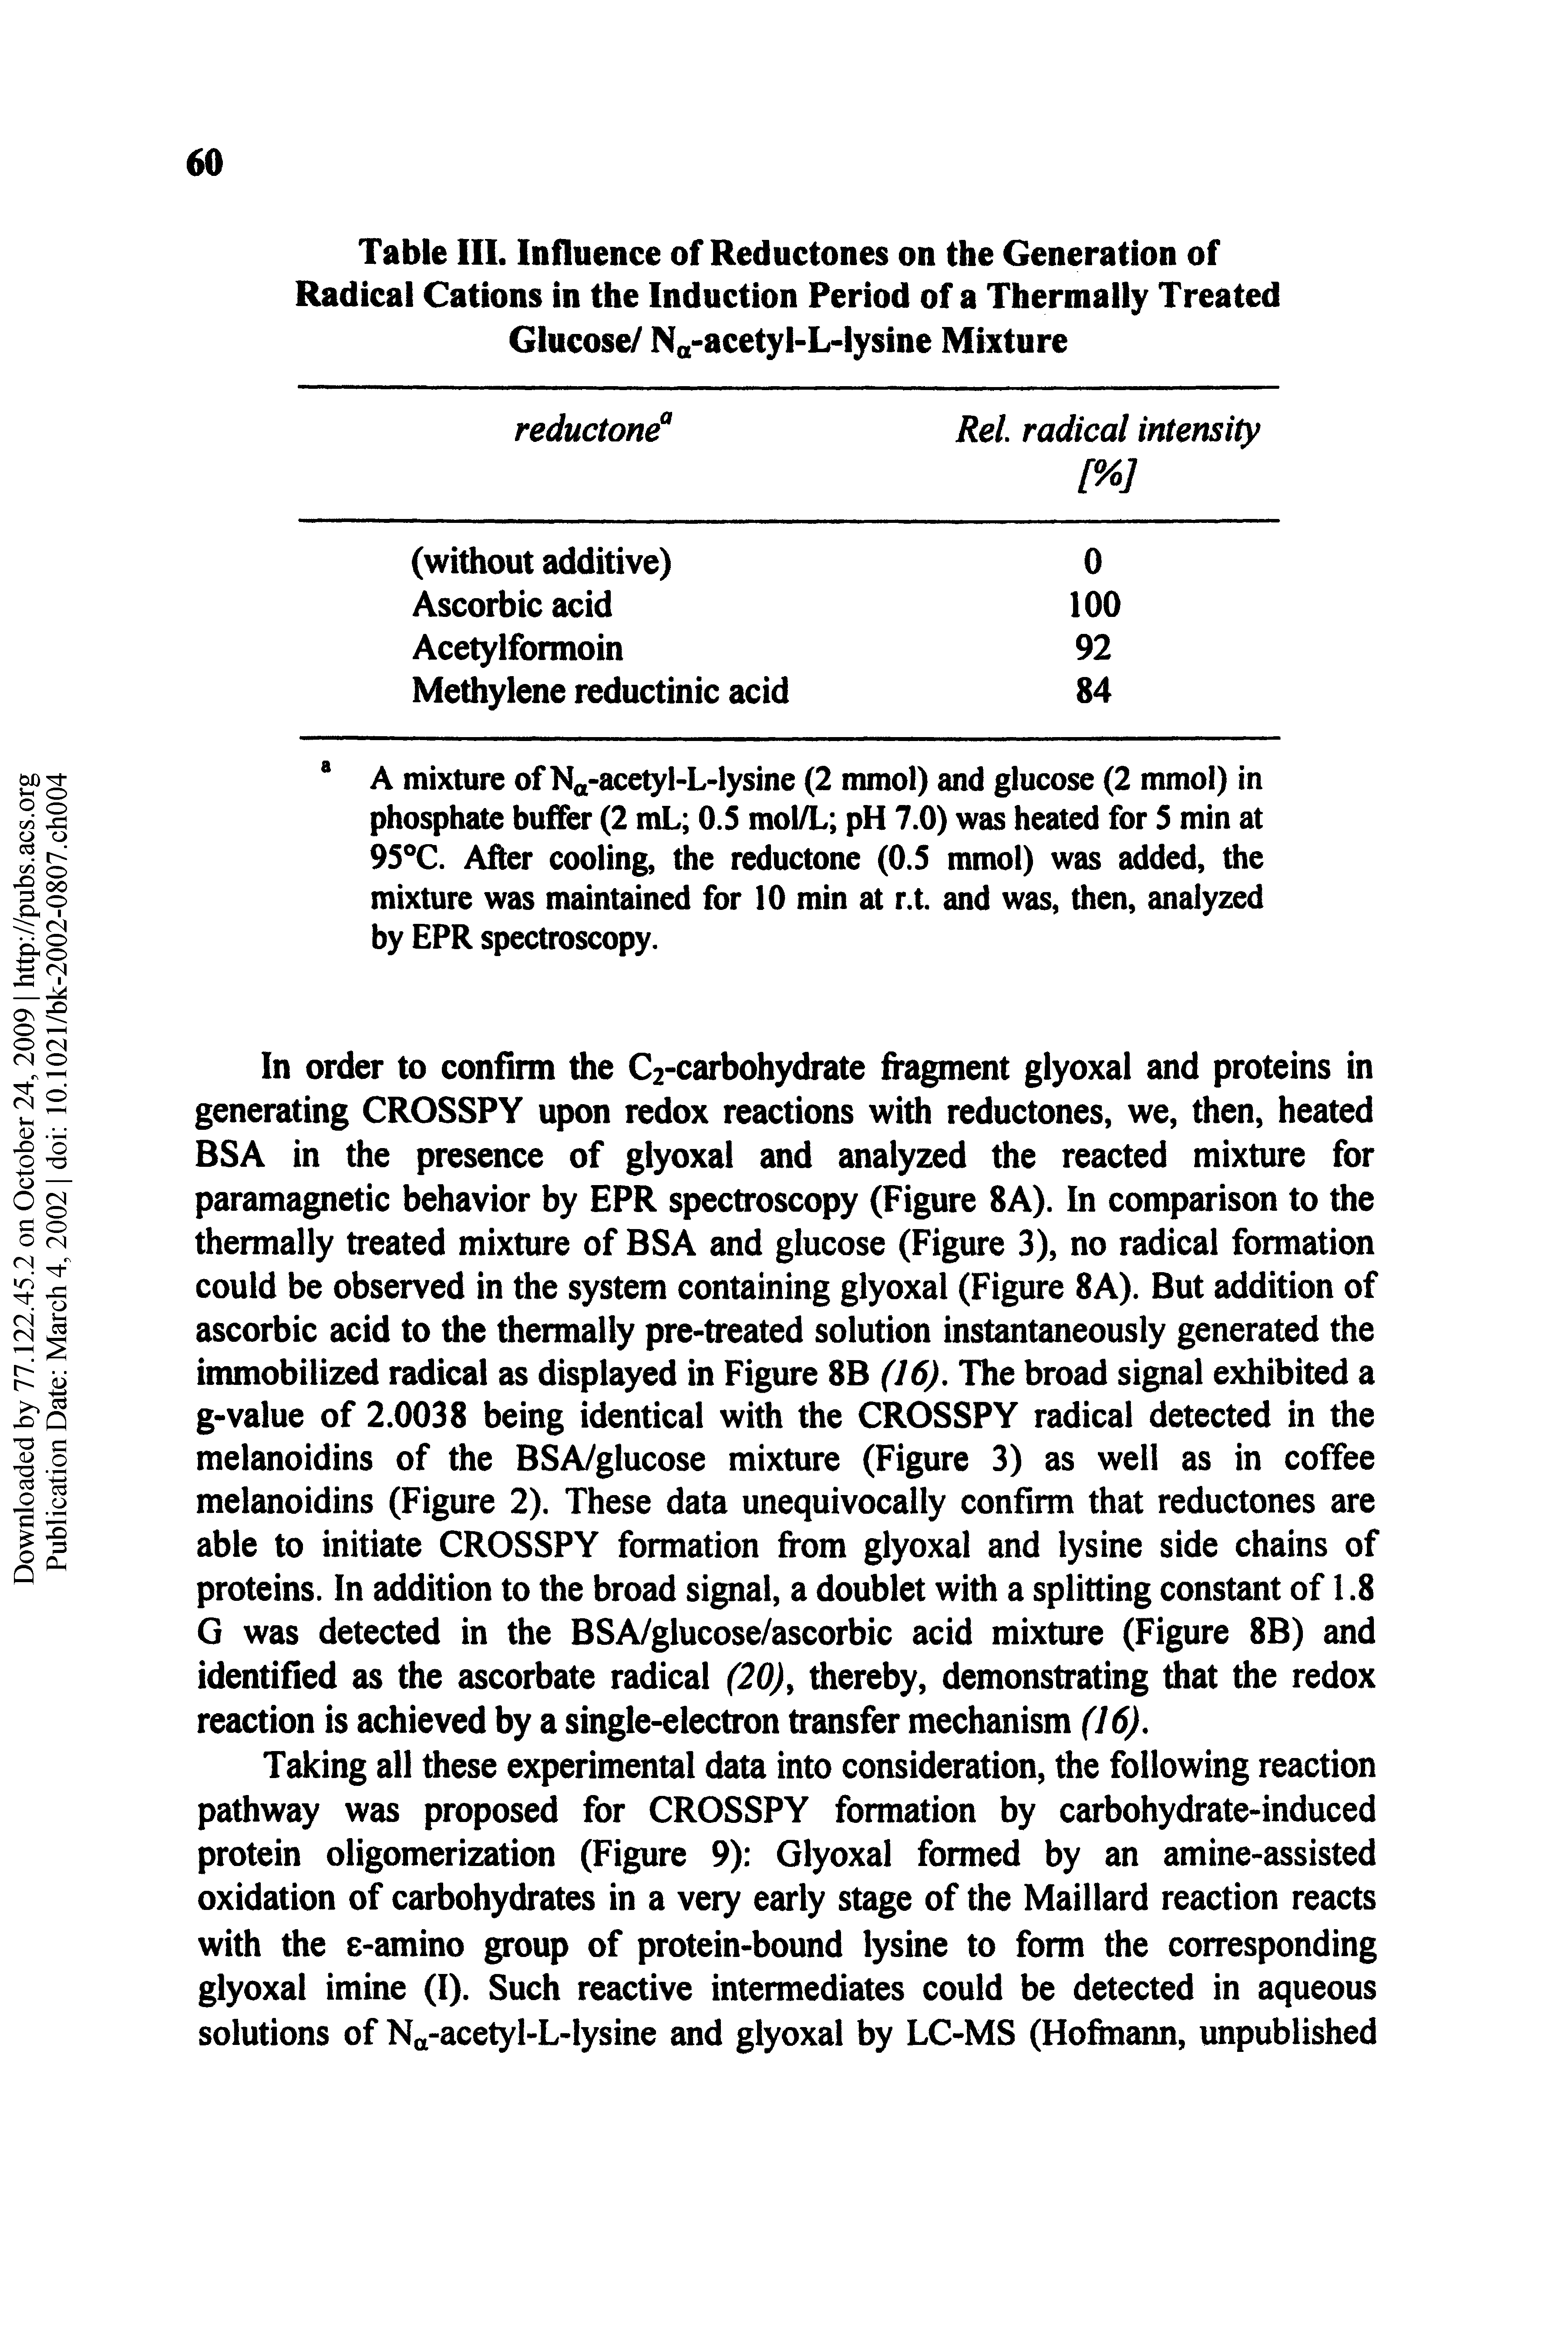 Table III. Influence of Reductones on the Generation of Radical Cations in the Induction Period of a Thermally Treated Glucose/ Na-acetyl-L-lysine Mixture...